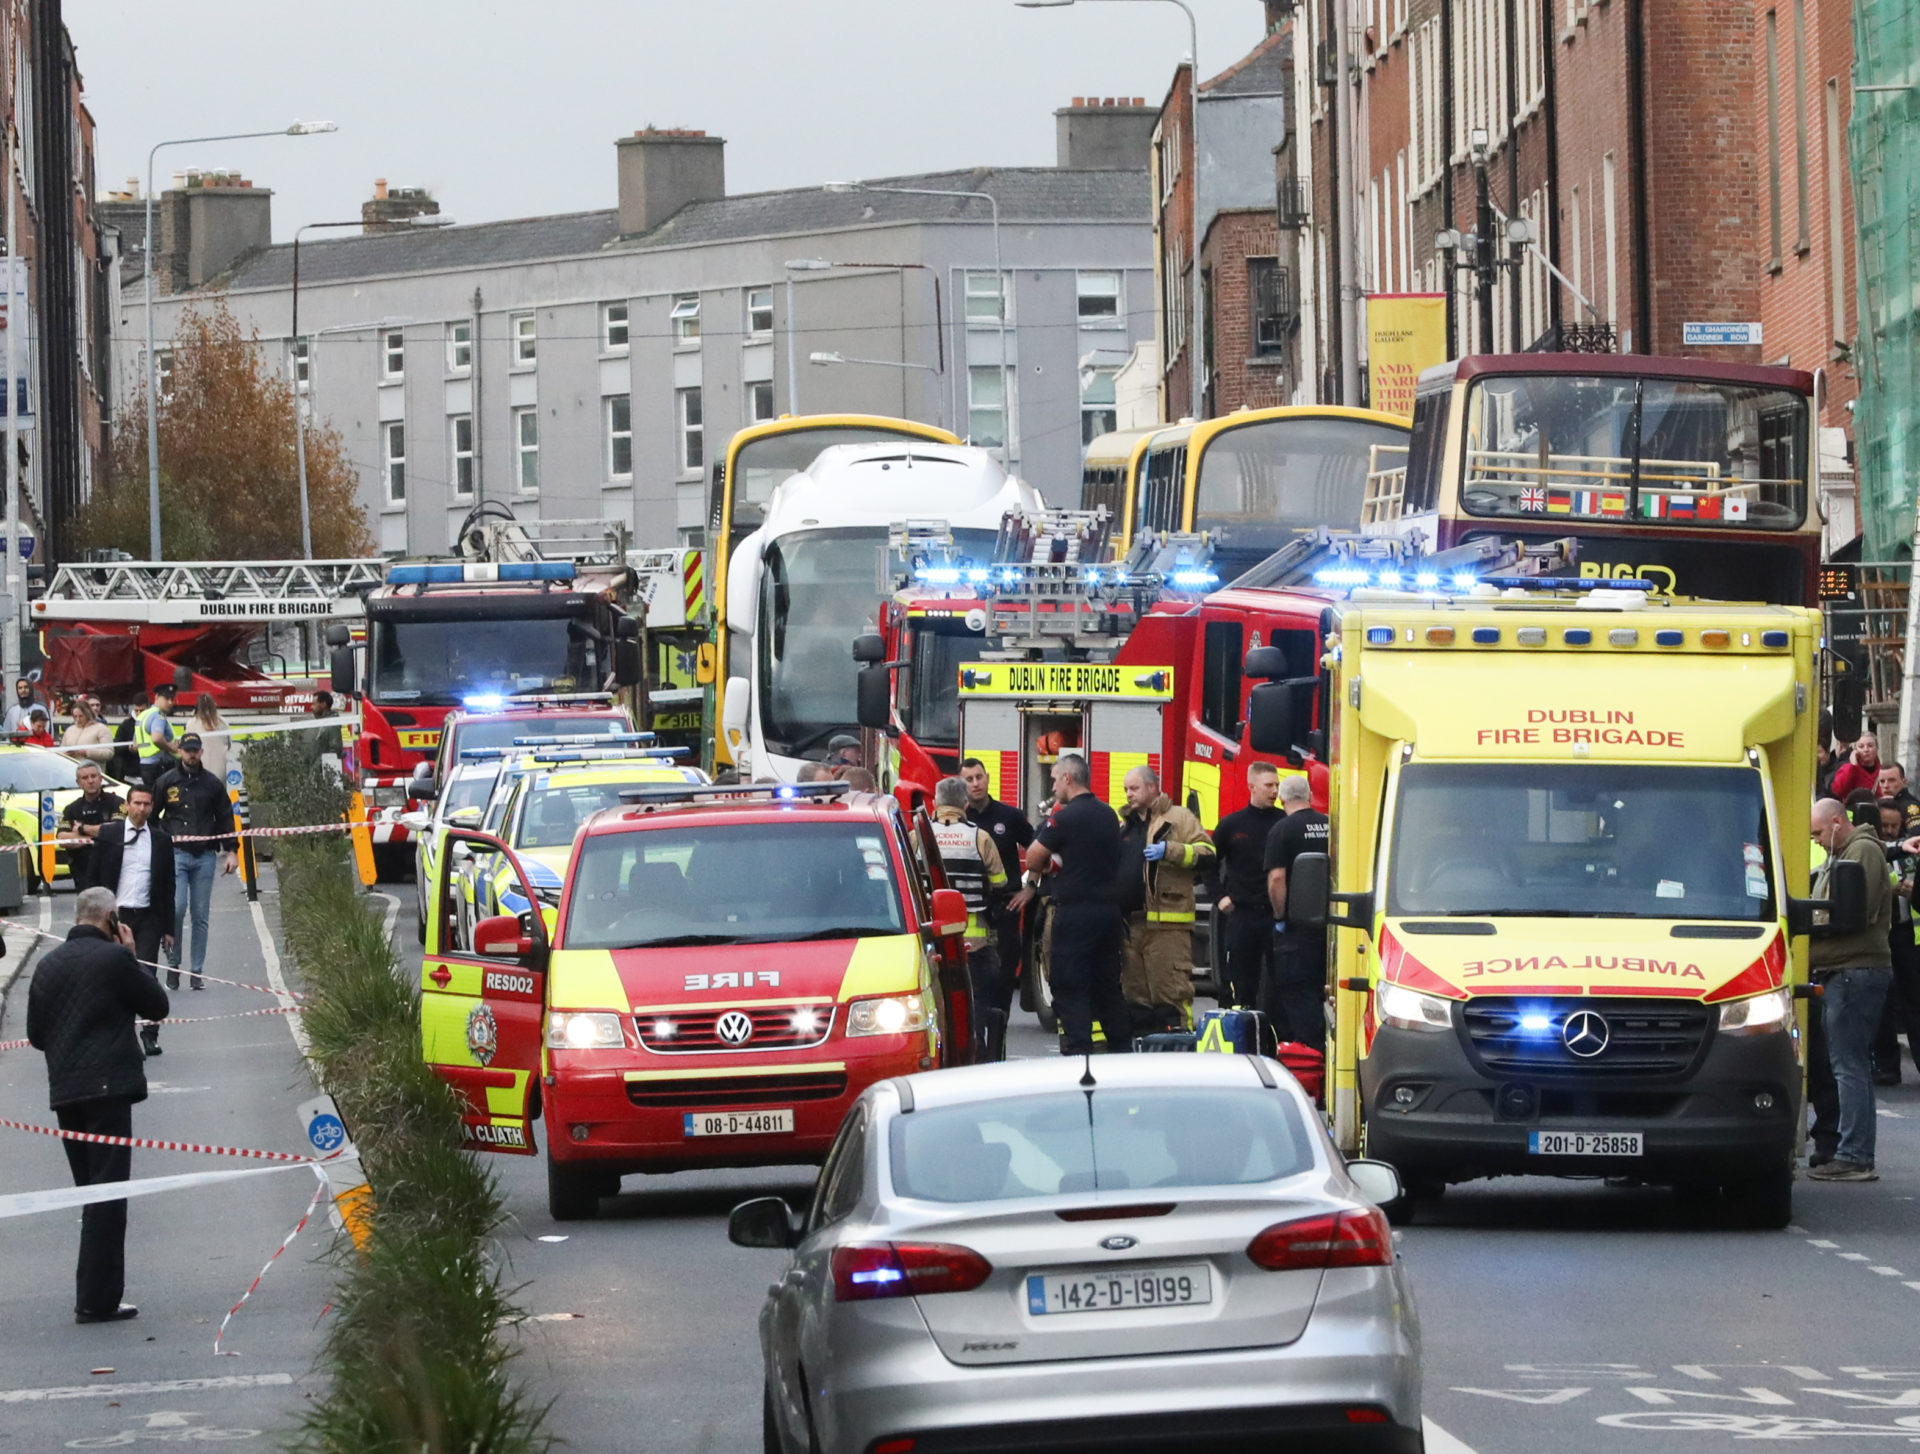 Gardaí and emergency services at the scene of a serious incident on Parnell Square East in Dublin city centre, 23/11/2023.